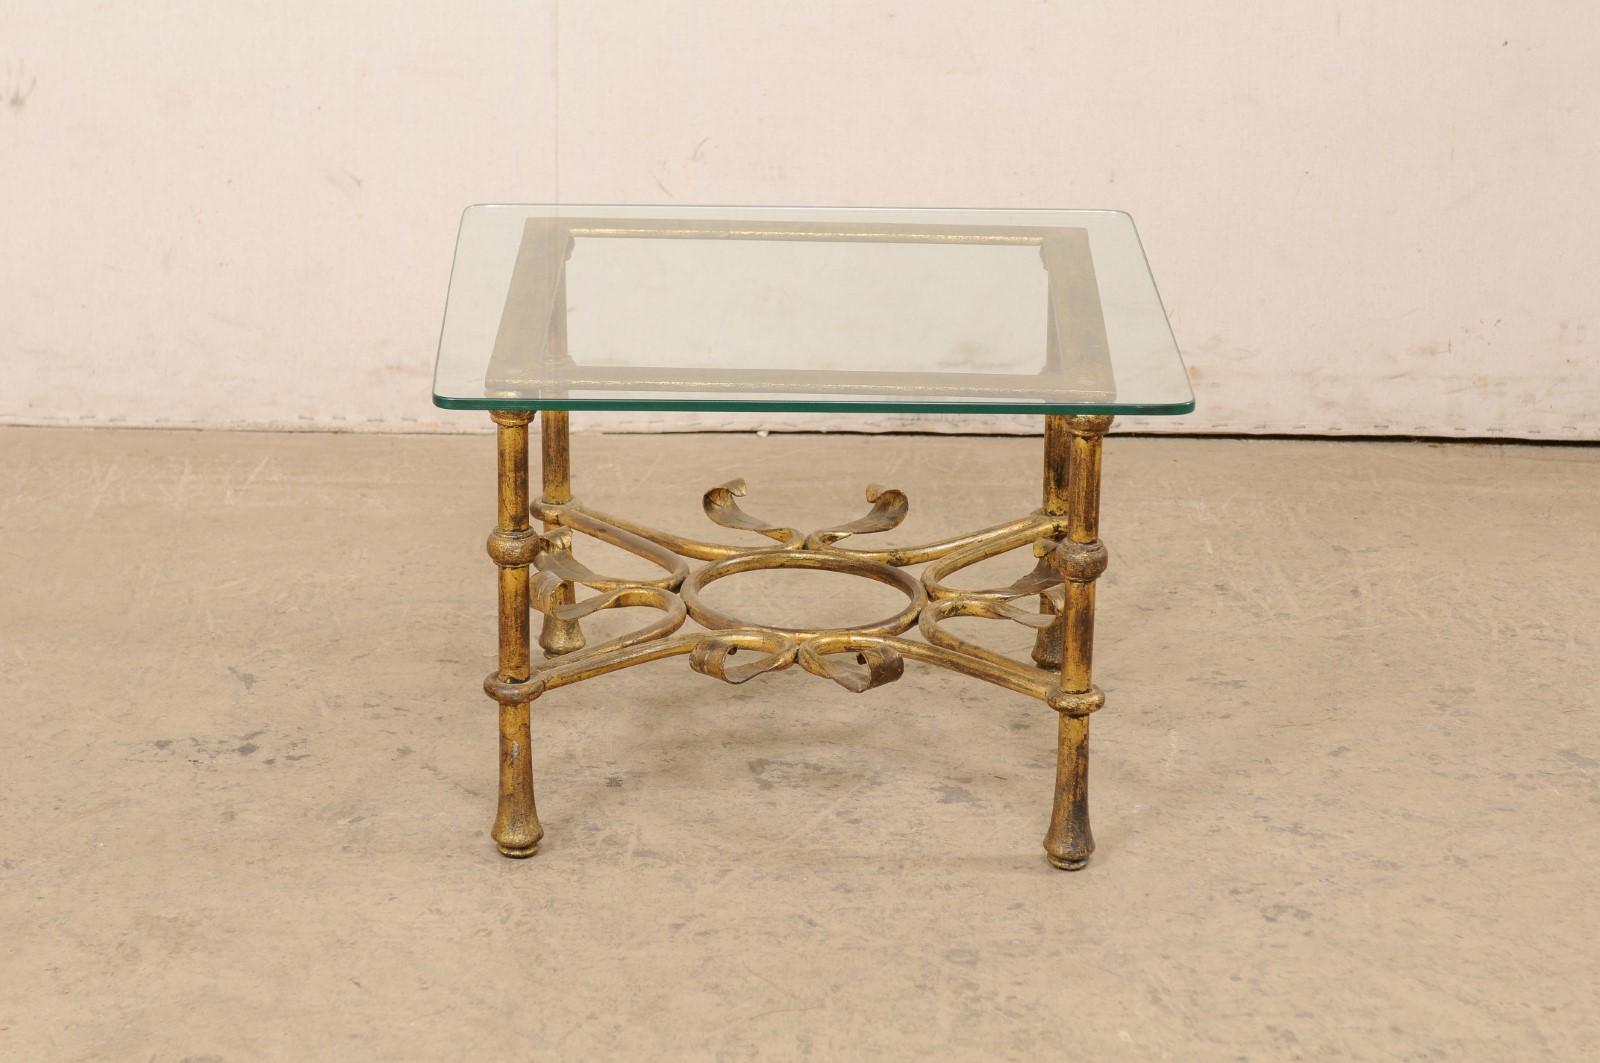 Spanish Accent Table with Gilt Iron Base & Square-Shaped Glass Top, Mid 20th C. For Sale 5